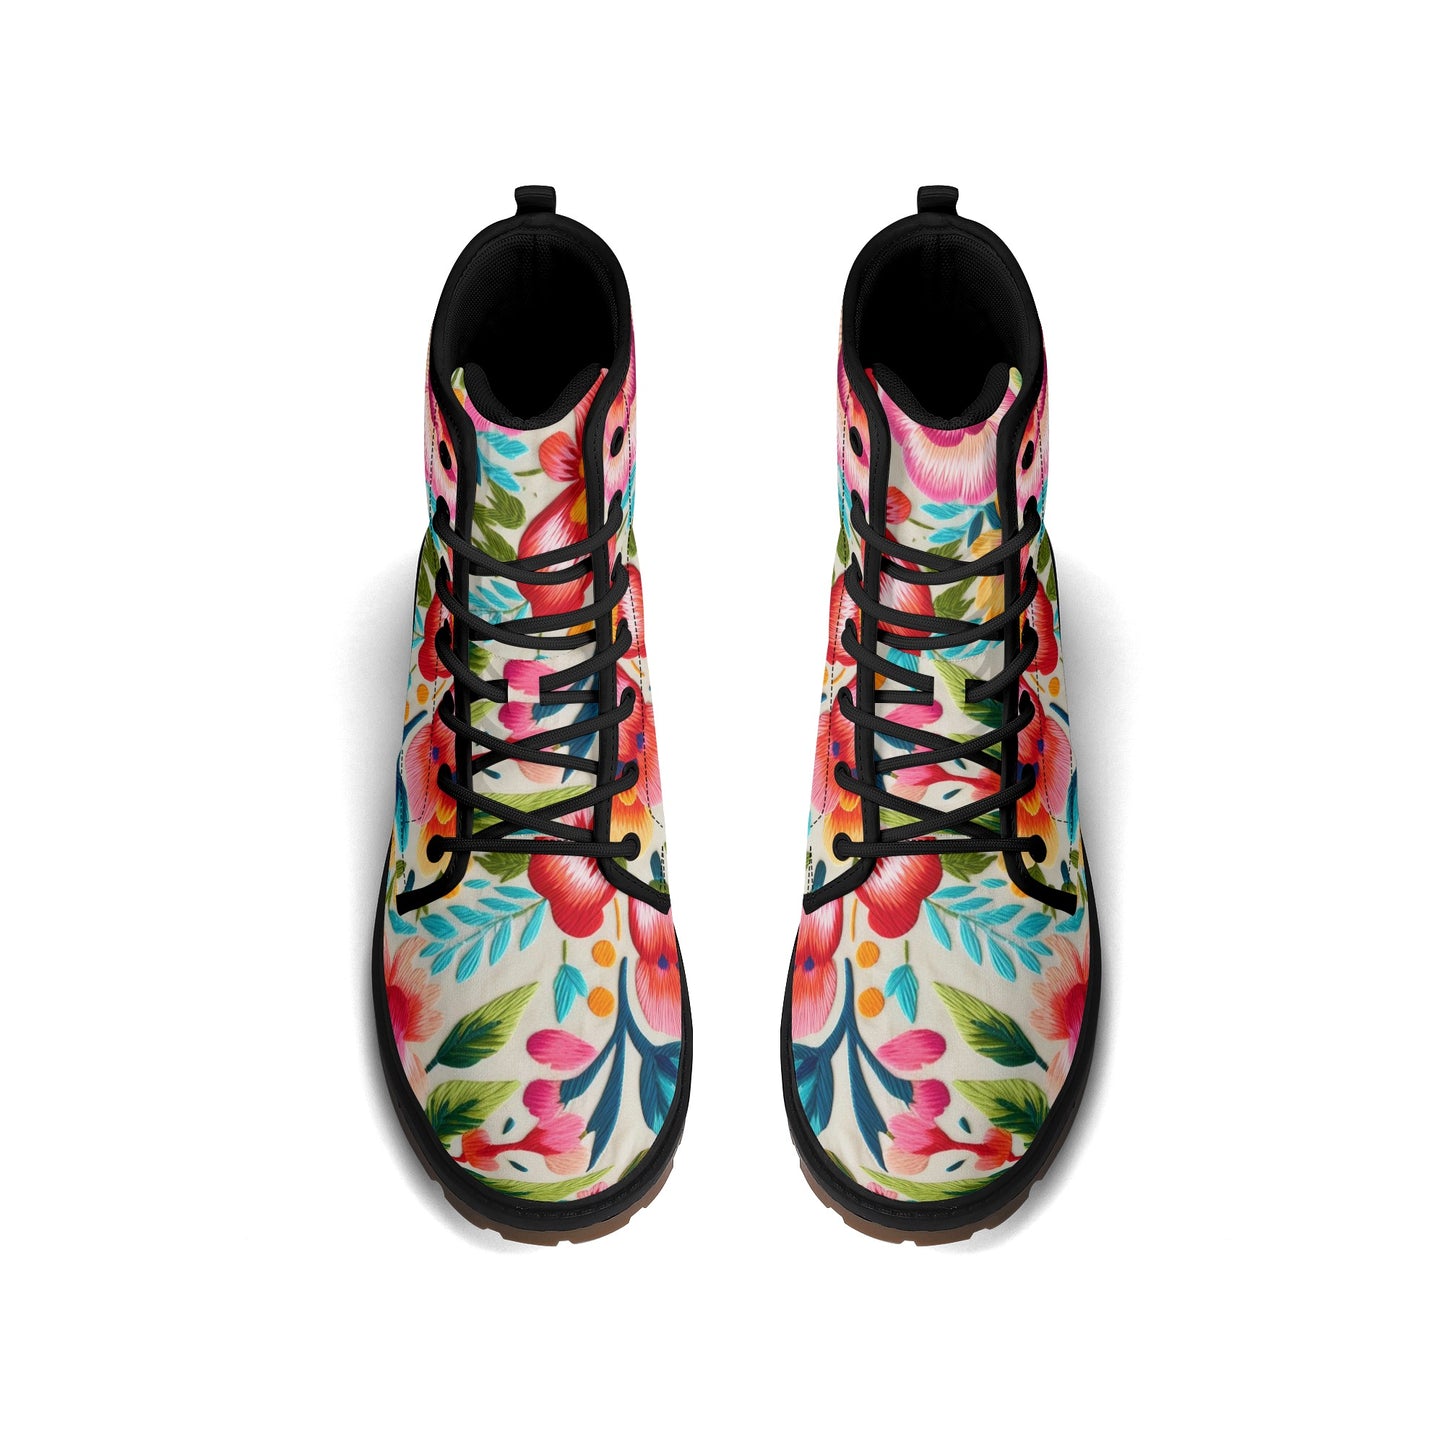 Colorful Flowers Womens Faux Embroidered Luxe Combat Boots